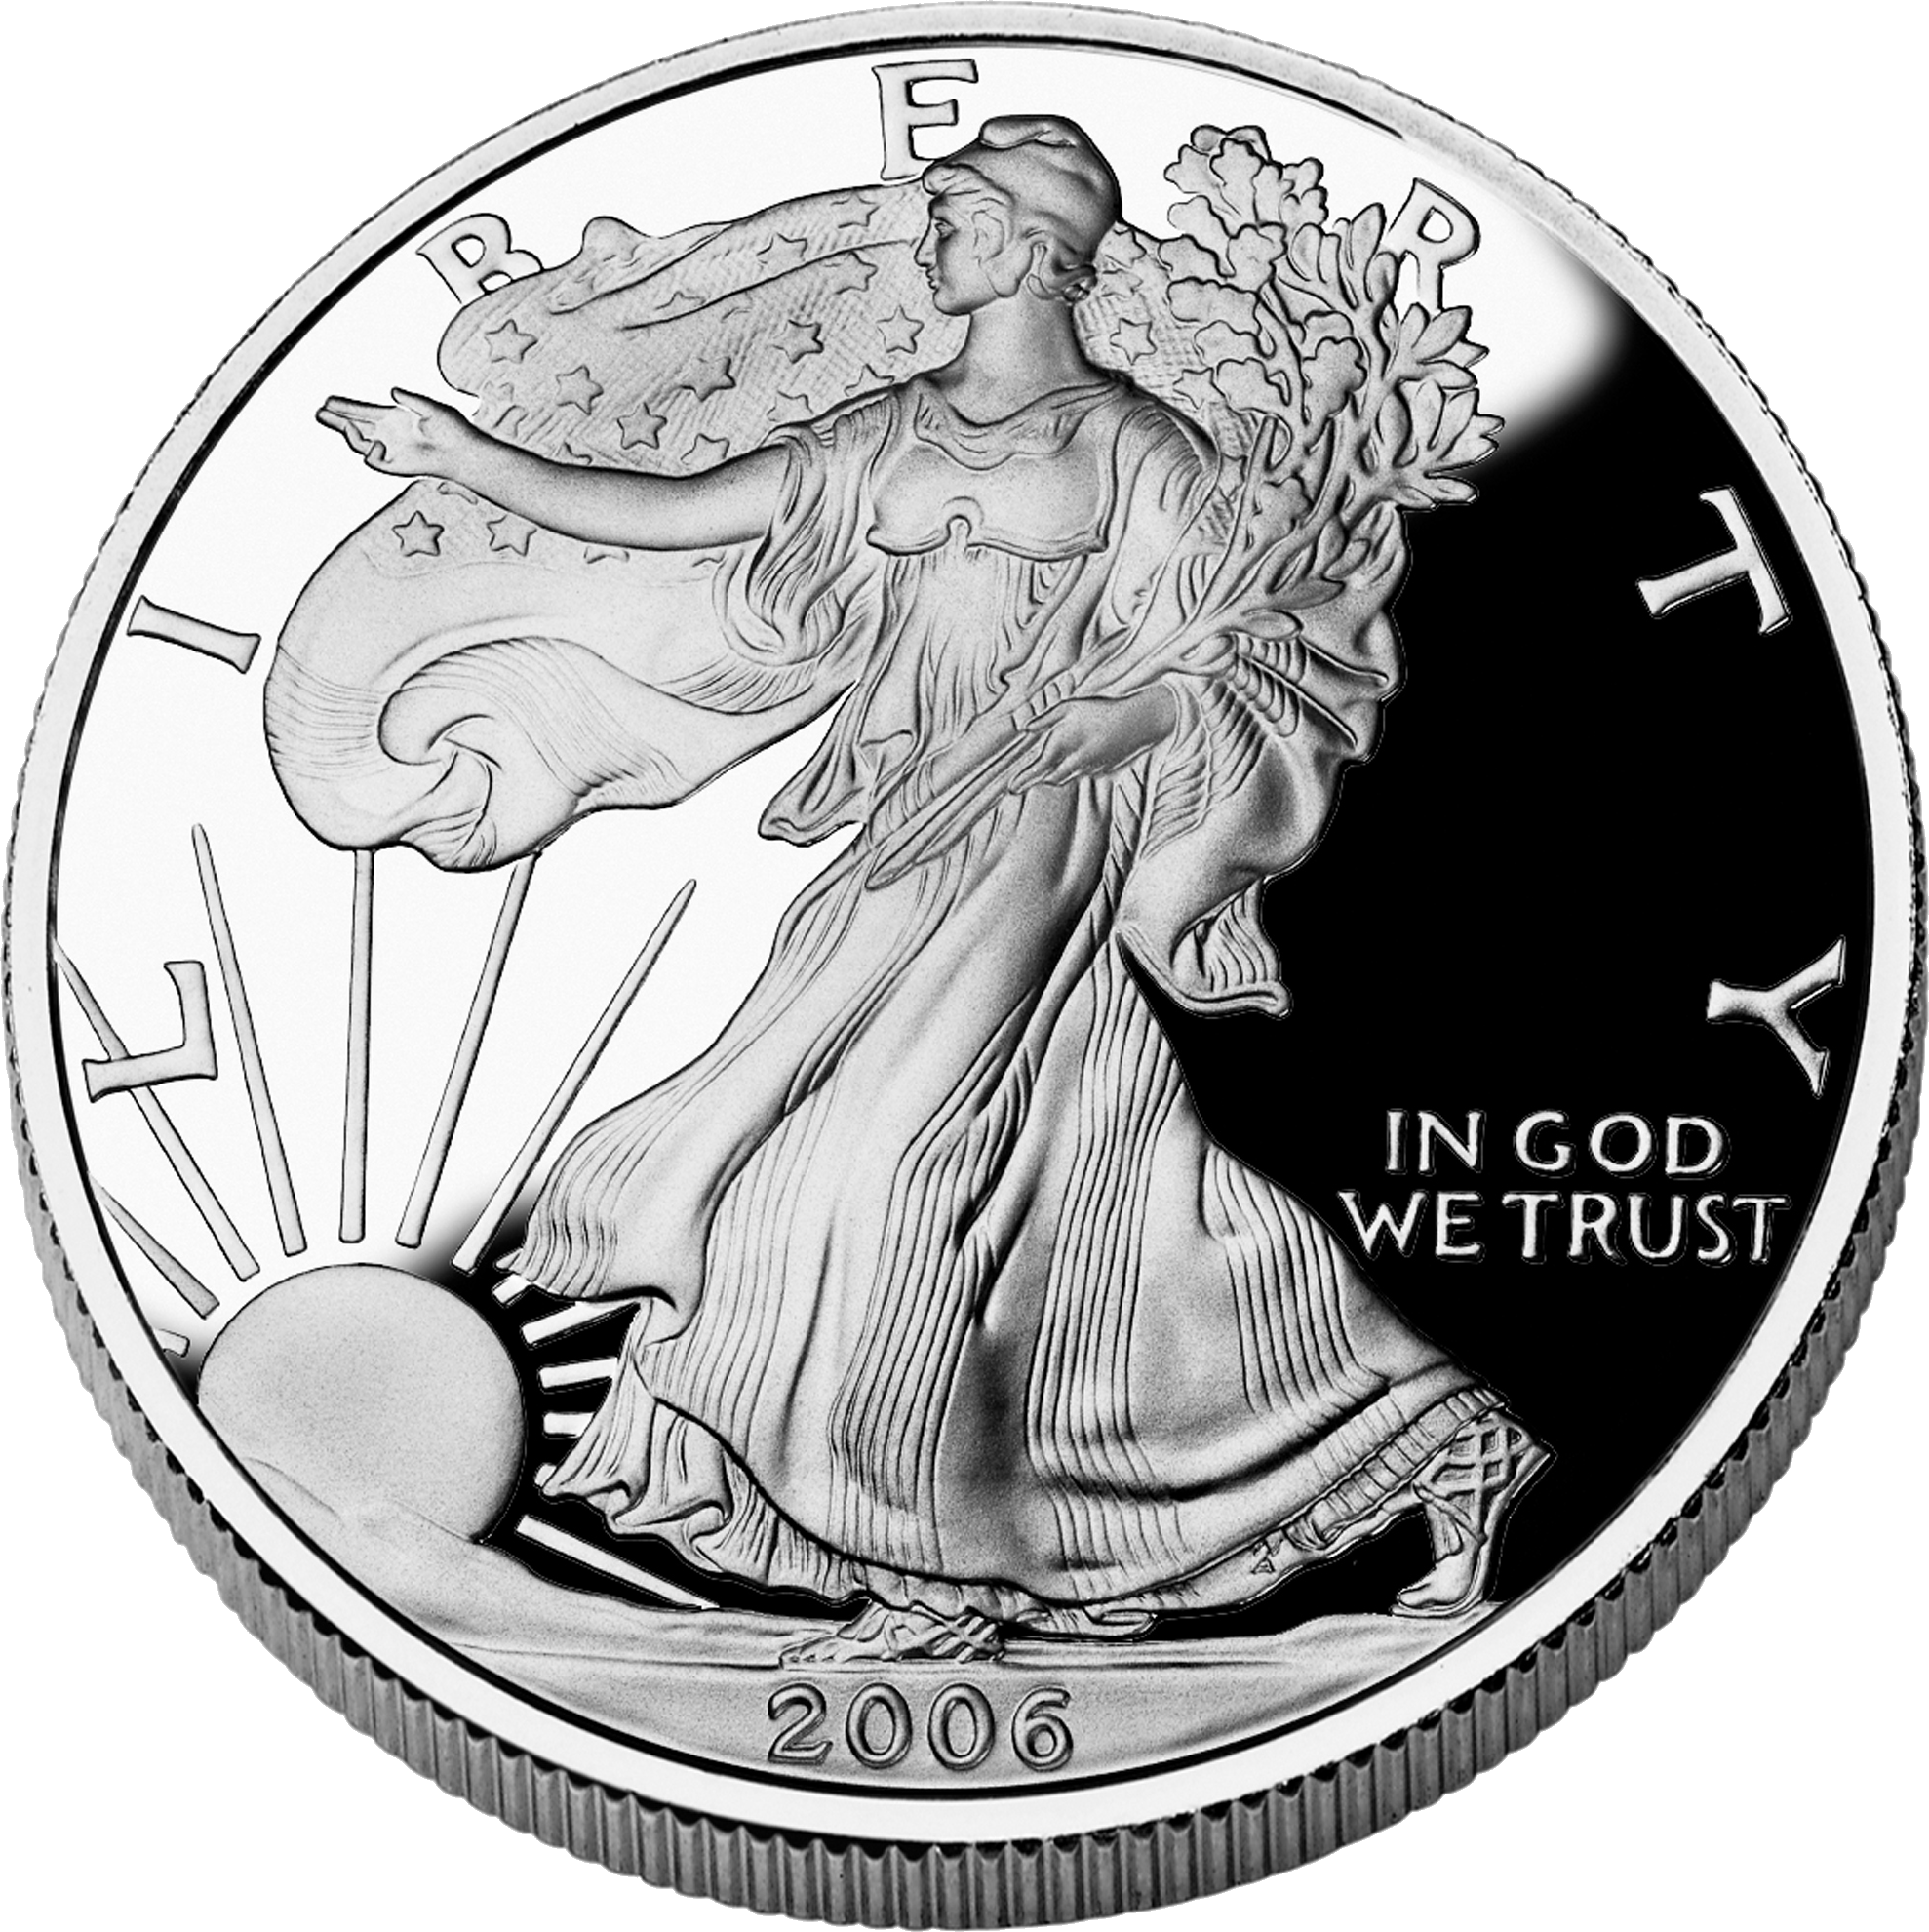 coin clipart cost